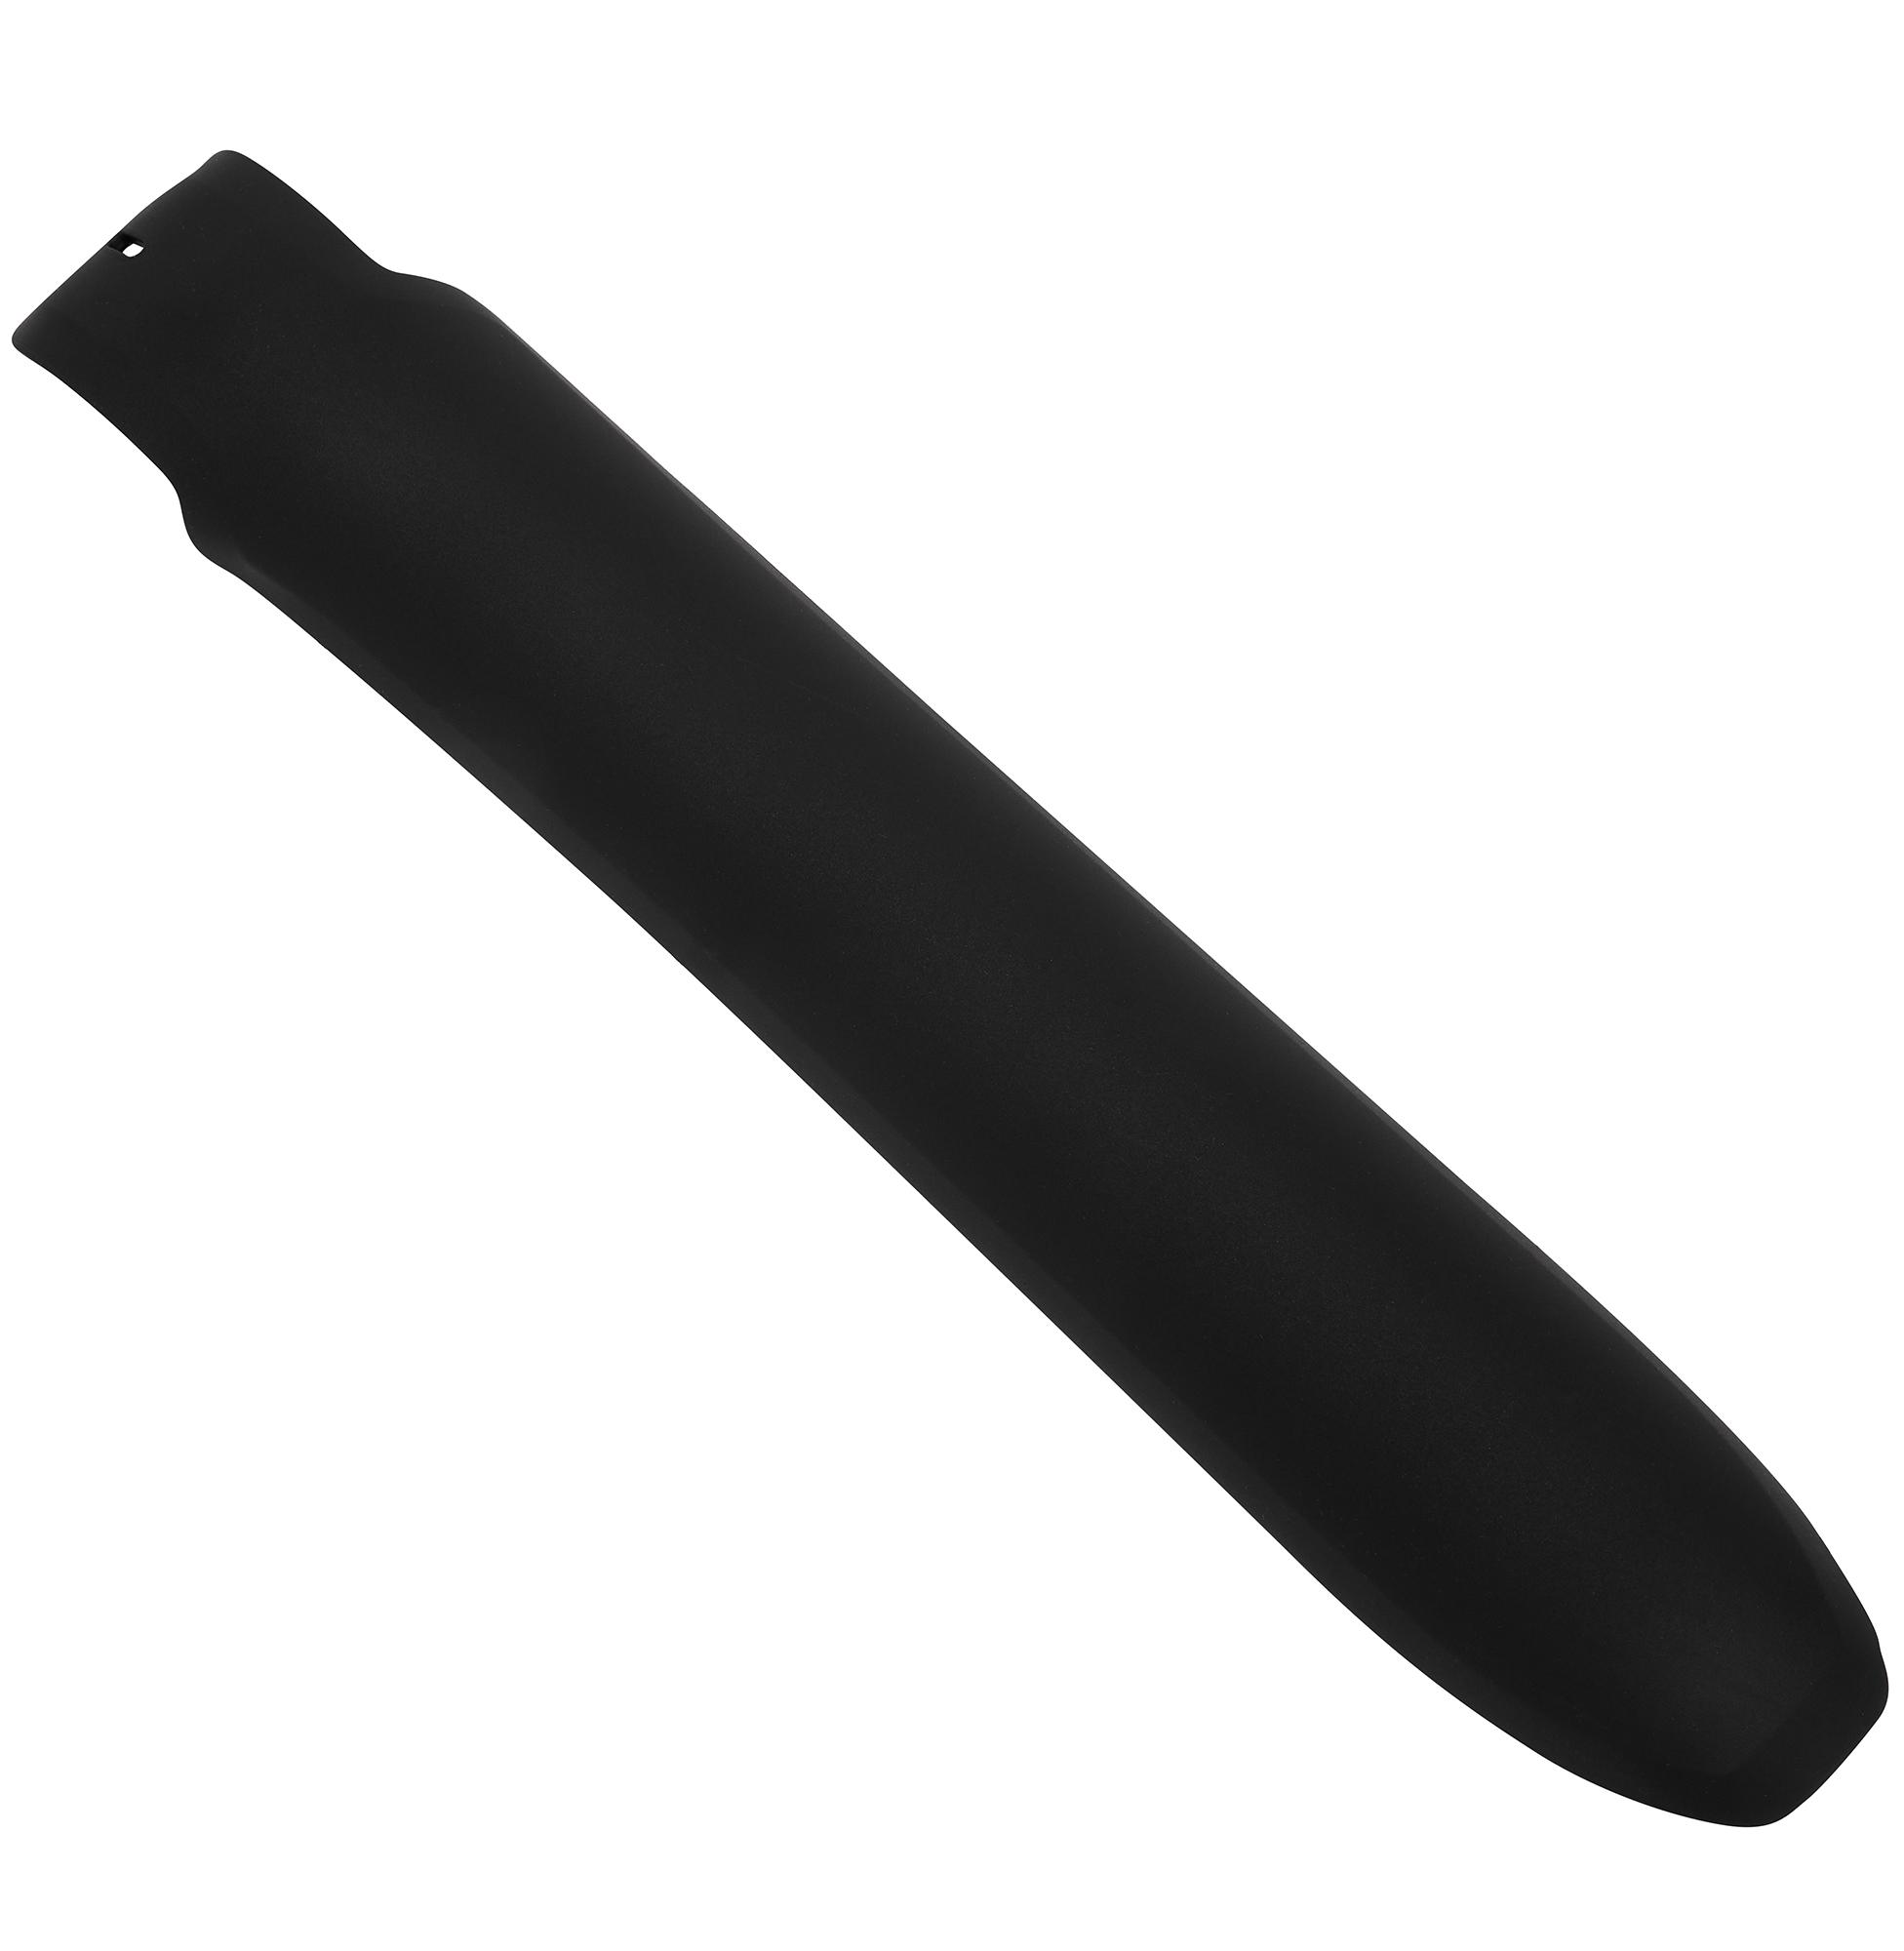 Nukeproof Dissent Carbon Downtube Protector - Black